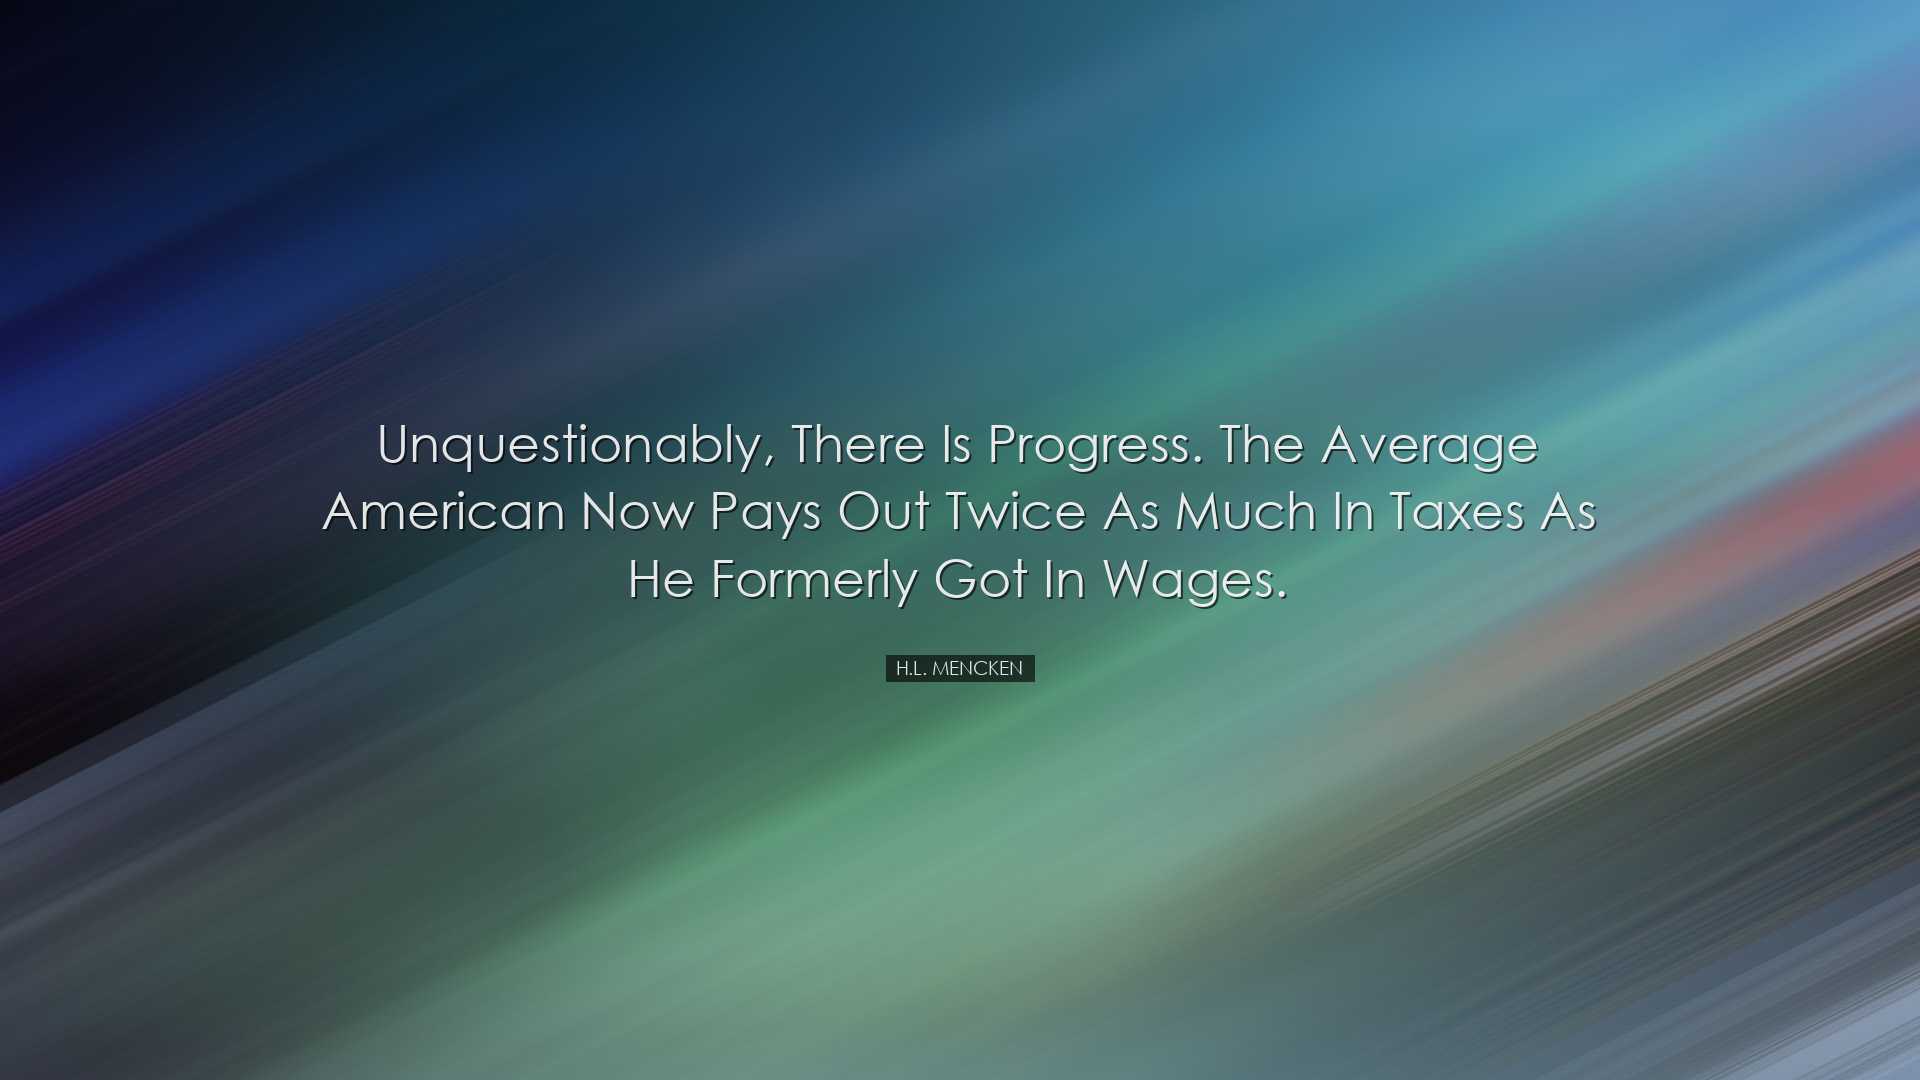 Unquestionably, there is progress. The average American now pays o